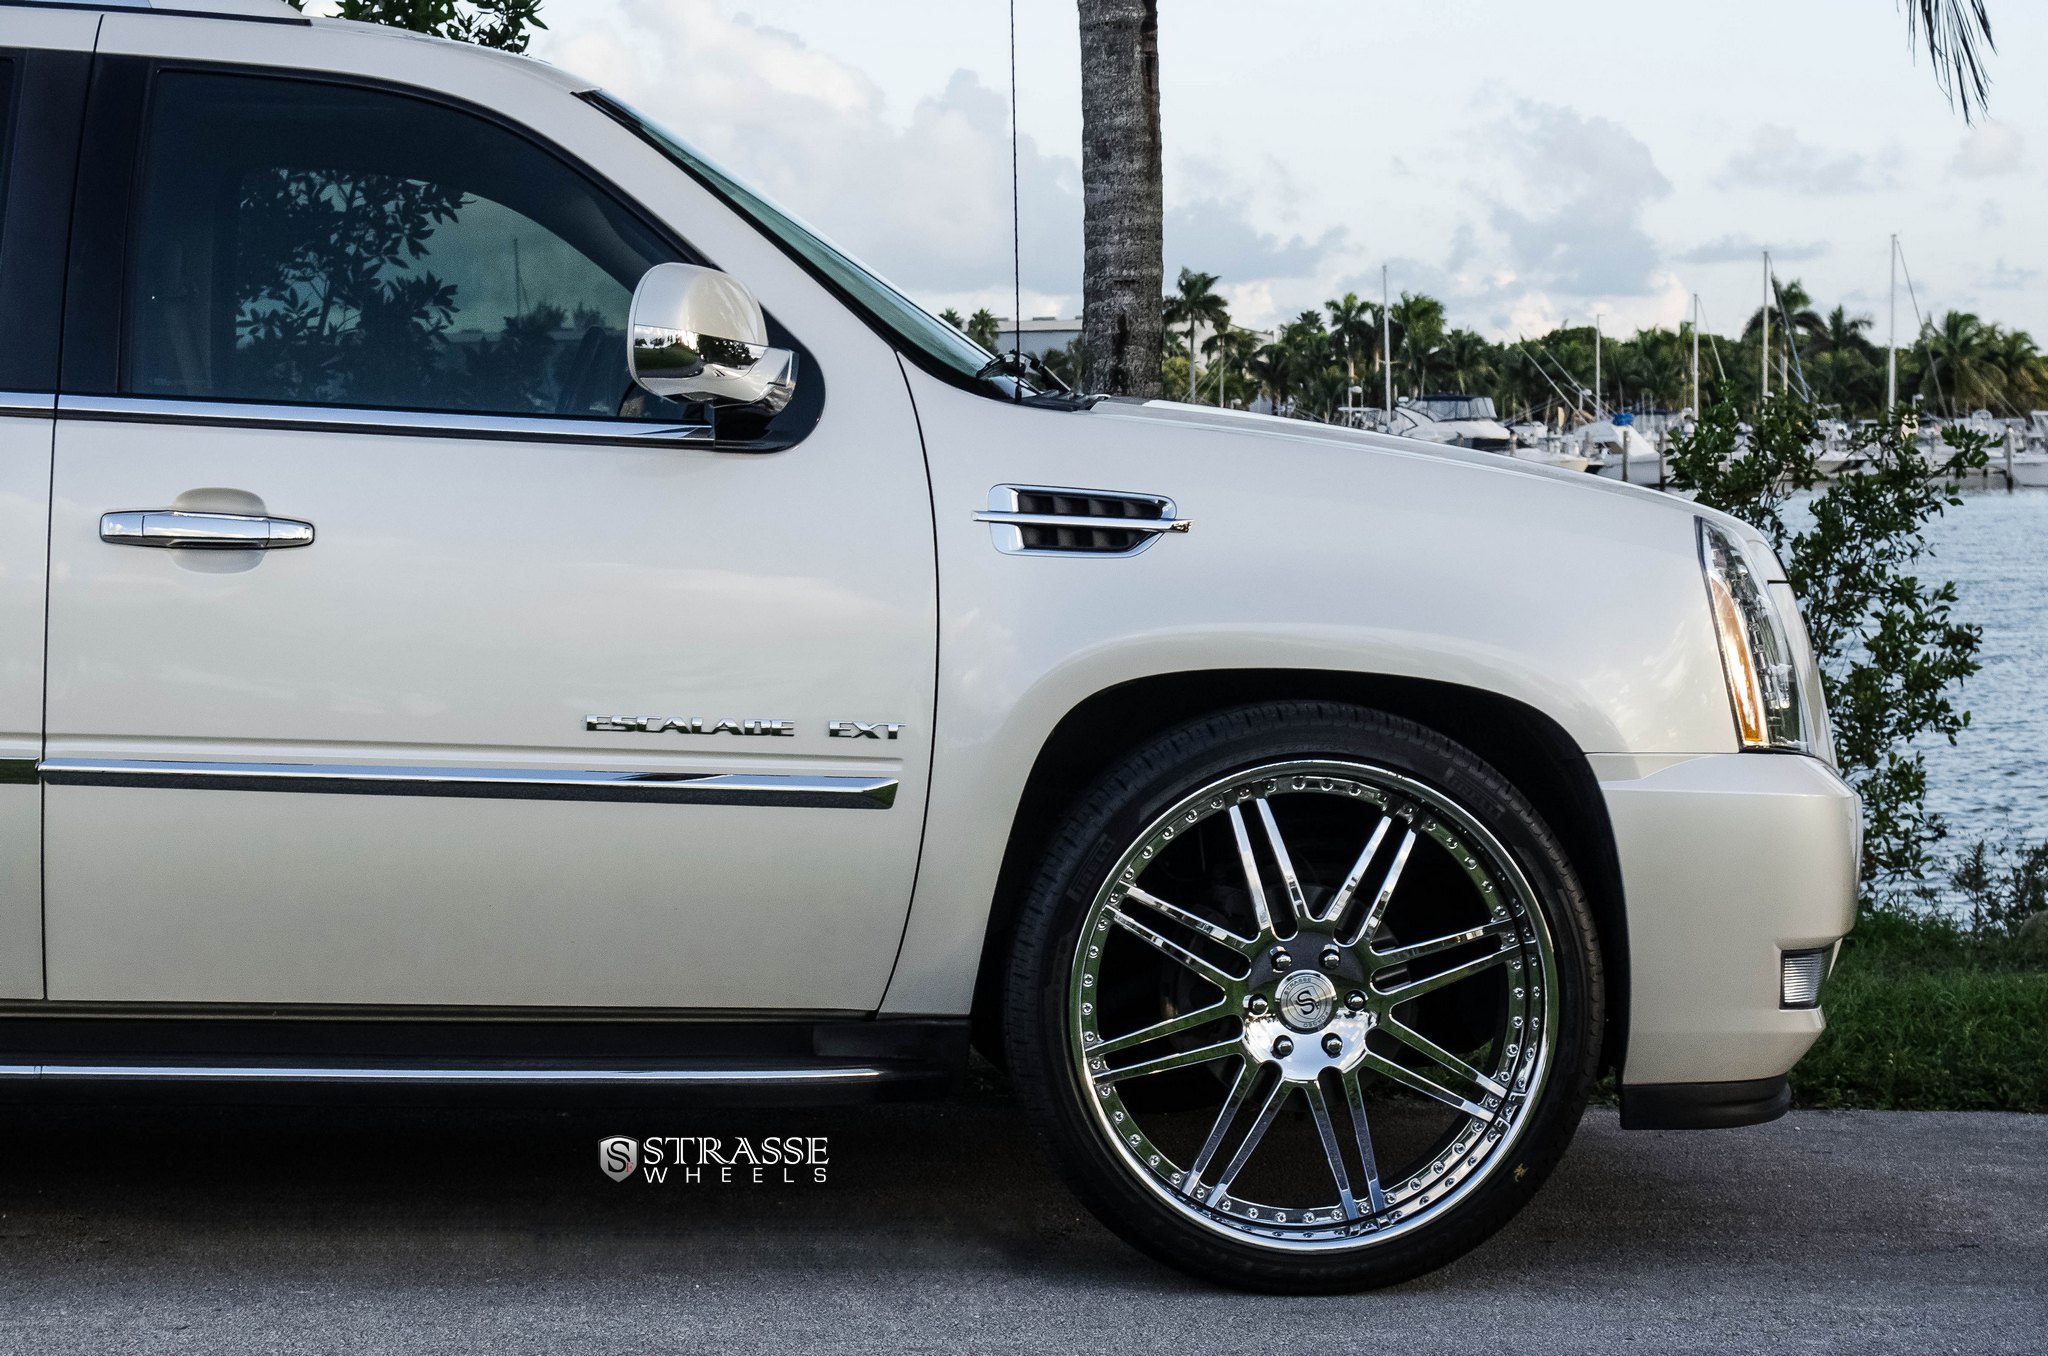 Aftermarket Running Boards on White Cadillac Escalade EXT - Photo by Strasse Forged